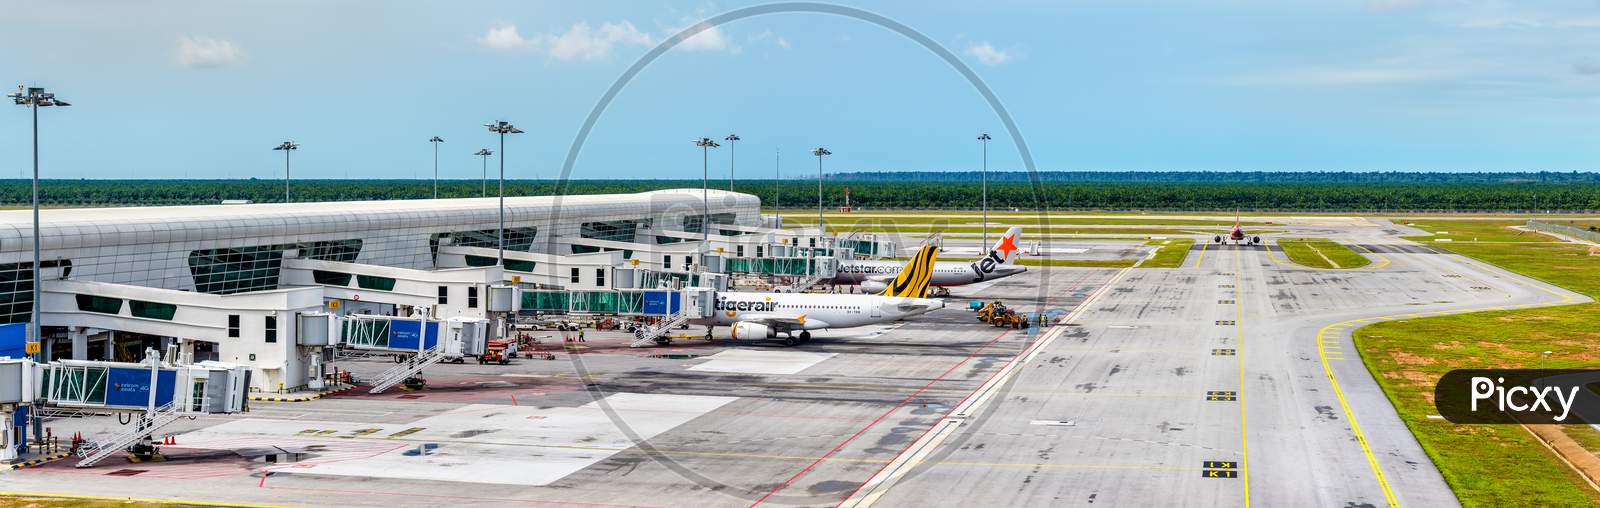 Airplanes At The Terminal Of Kuala Lumpur International Airport. Klia Is The Largest And Busiest Airport In Malaysia.